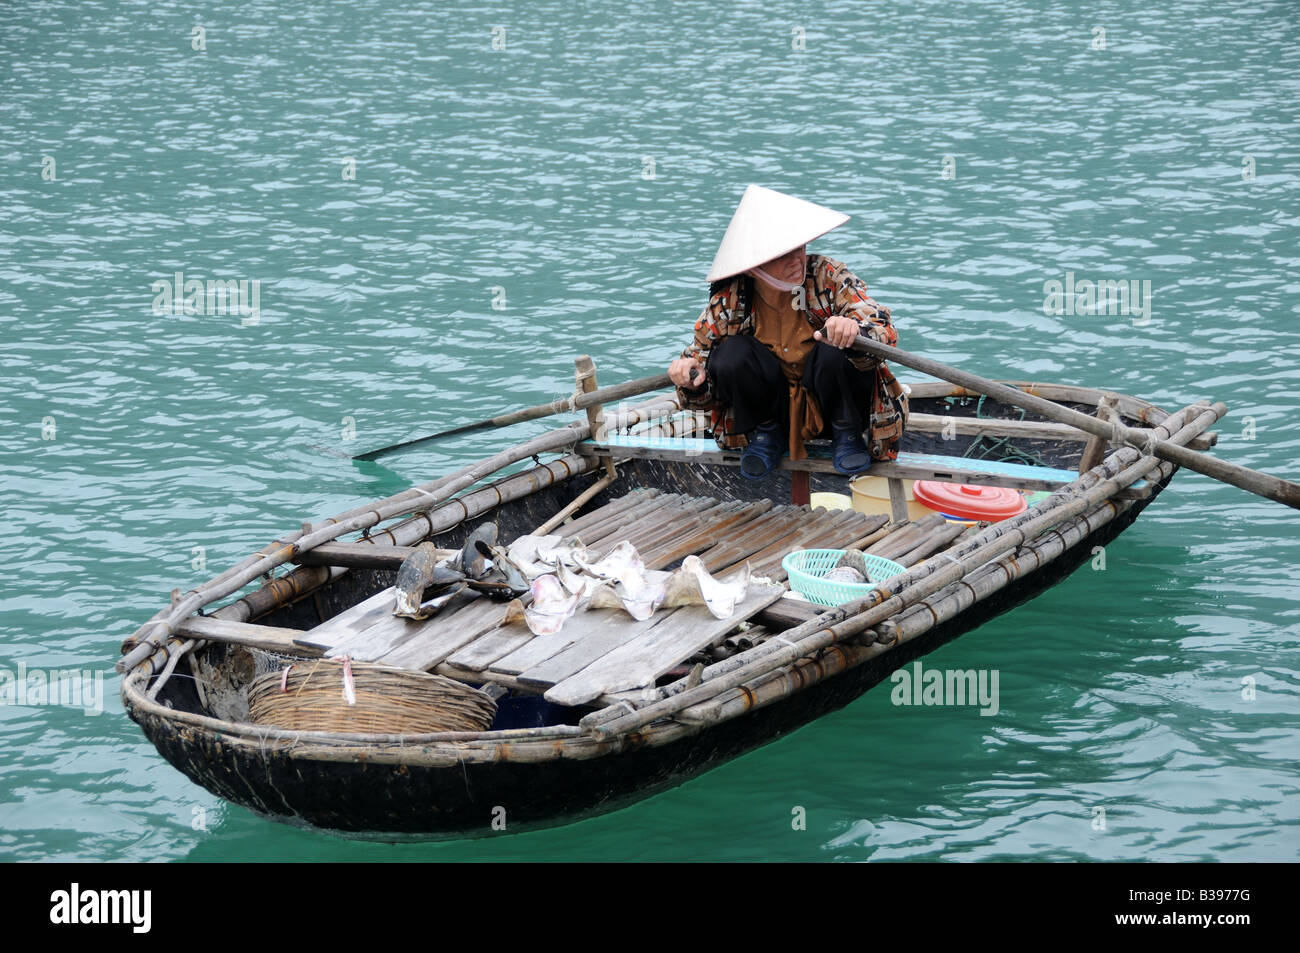 Agile Vietnamese woman selling shells from a small boat to make a living Halong Bay Vietnam Stock Photo